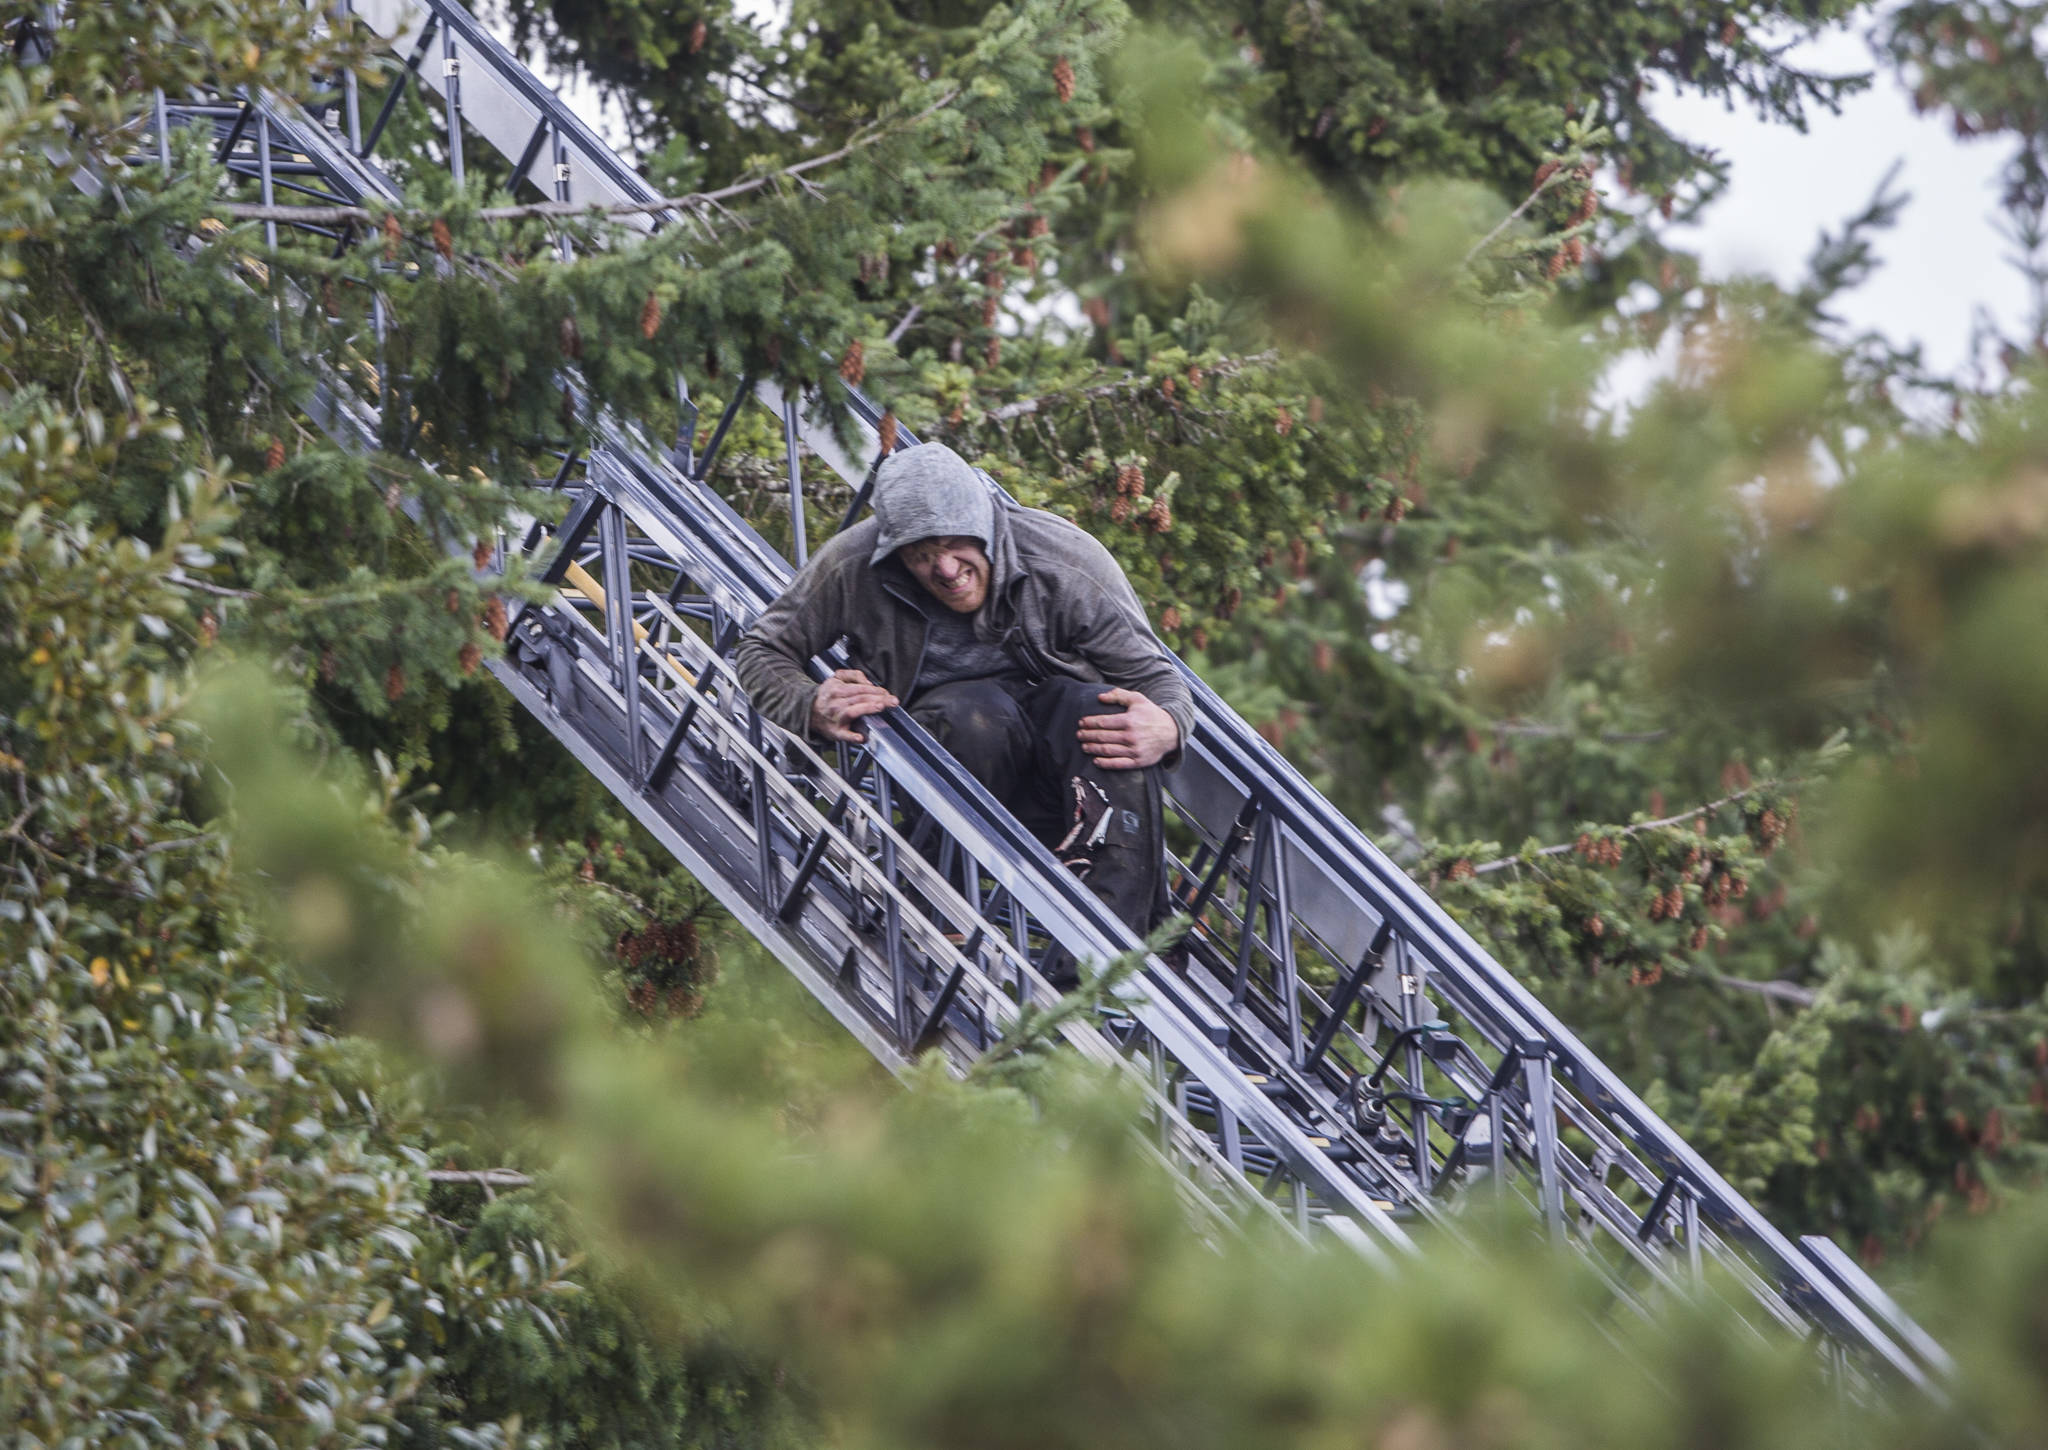 A carjacking suspect grabs his left leg and grimaces due to an apparent wound as he climbs down a ladder on Wednesday near Mill Creek. (Olivia Vanni / The Herald)